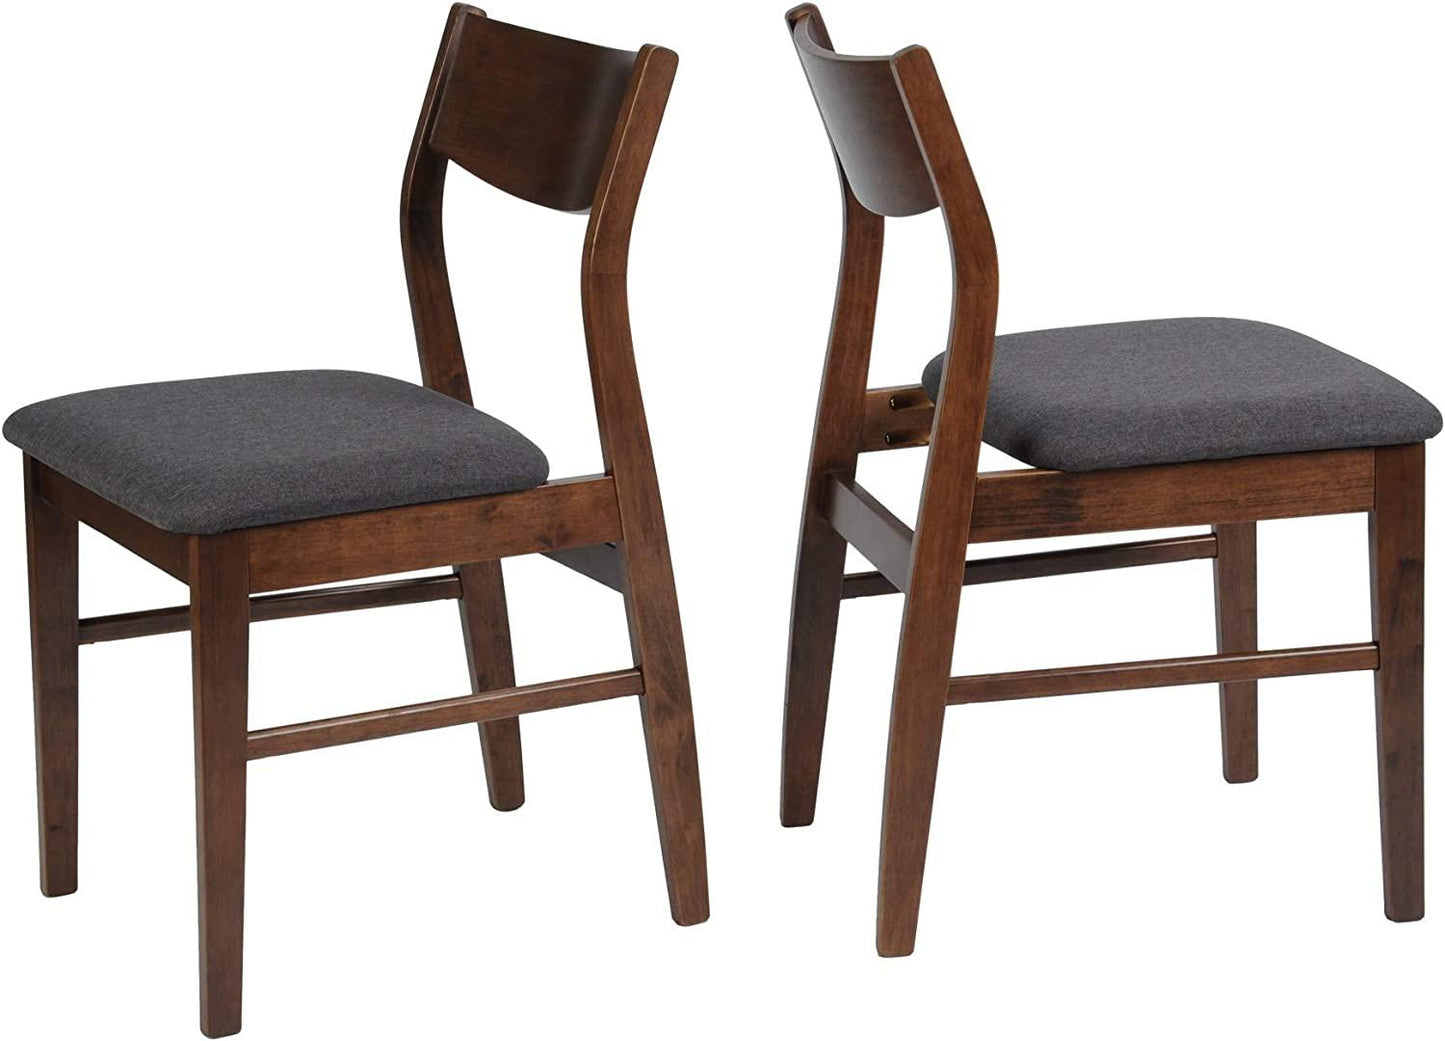 Set of 2 Mid-Century Dining Chairs in Dark Grey Fabric